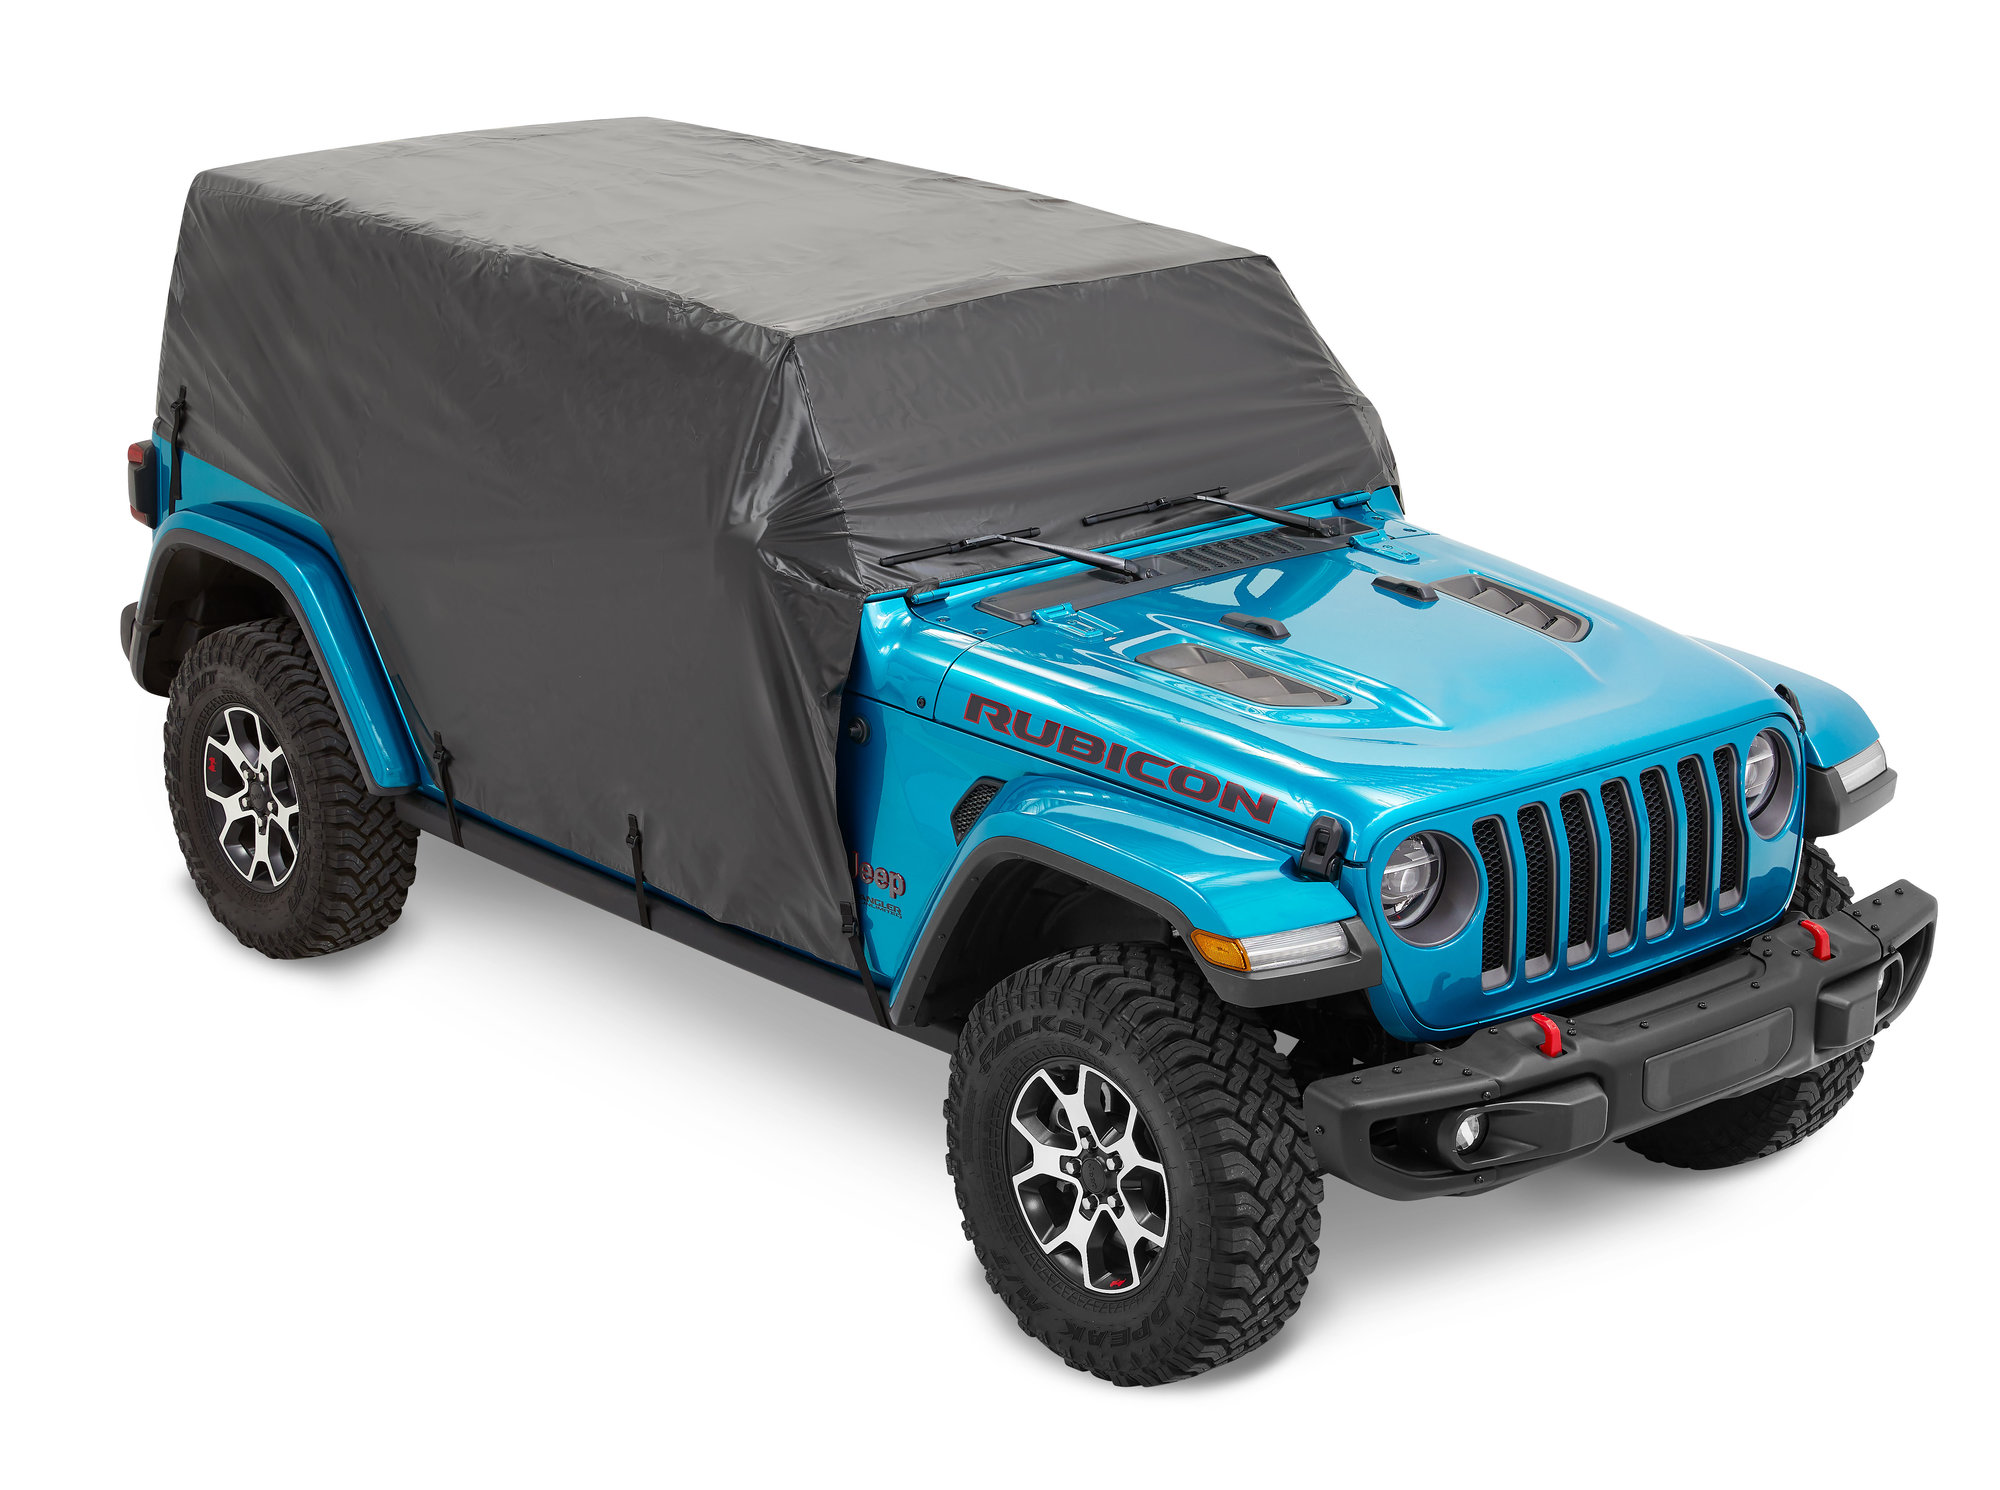 Bestop 81045-01 All Weather Trail Cover in Black for 07-21 Jeep Wrangler JK  & JL Unlimited | Quadratec